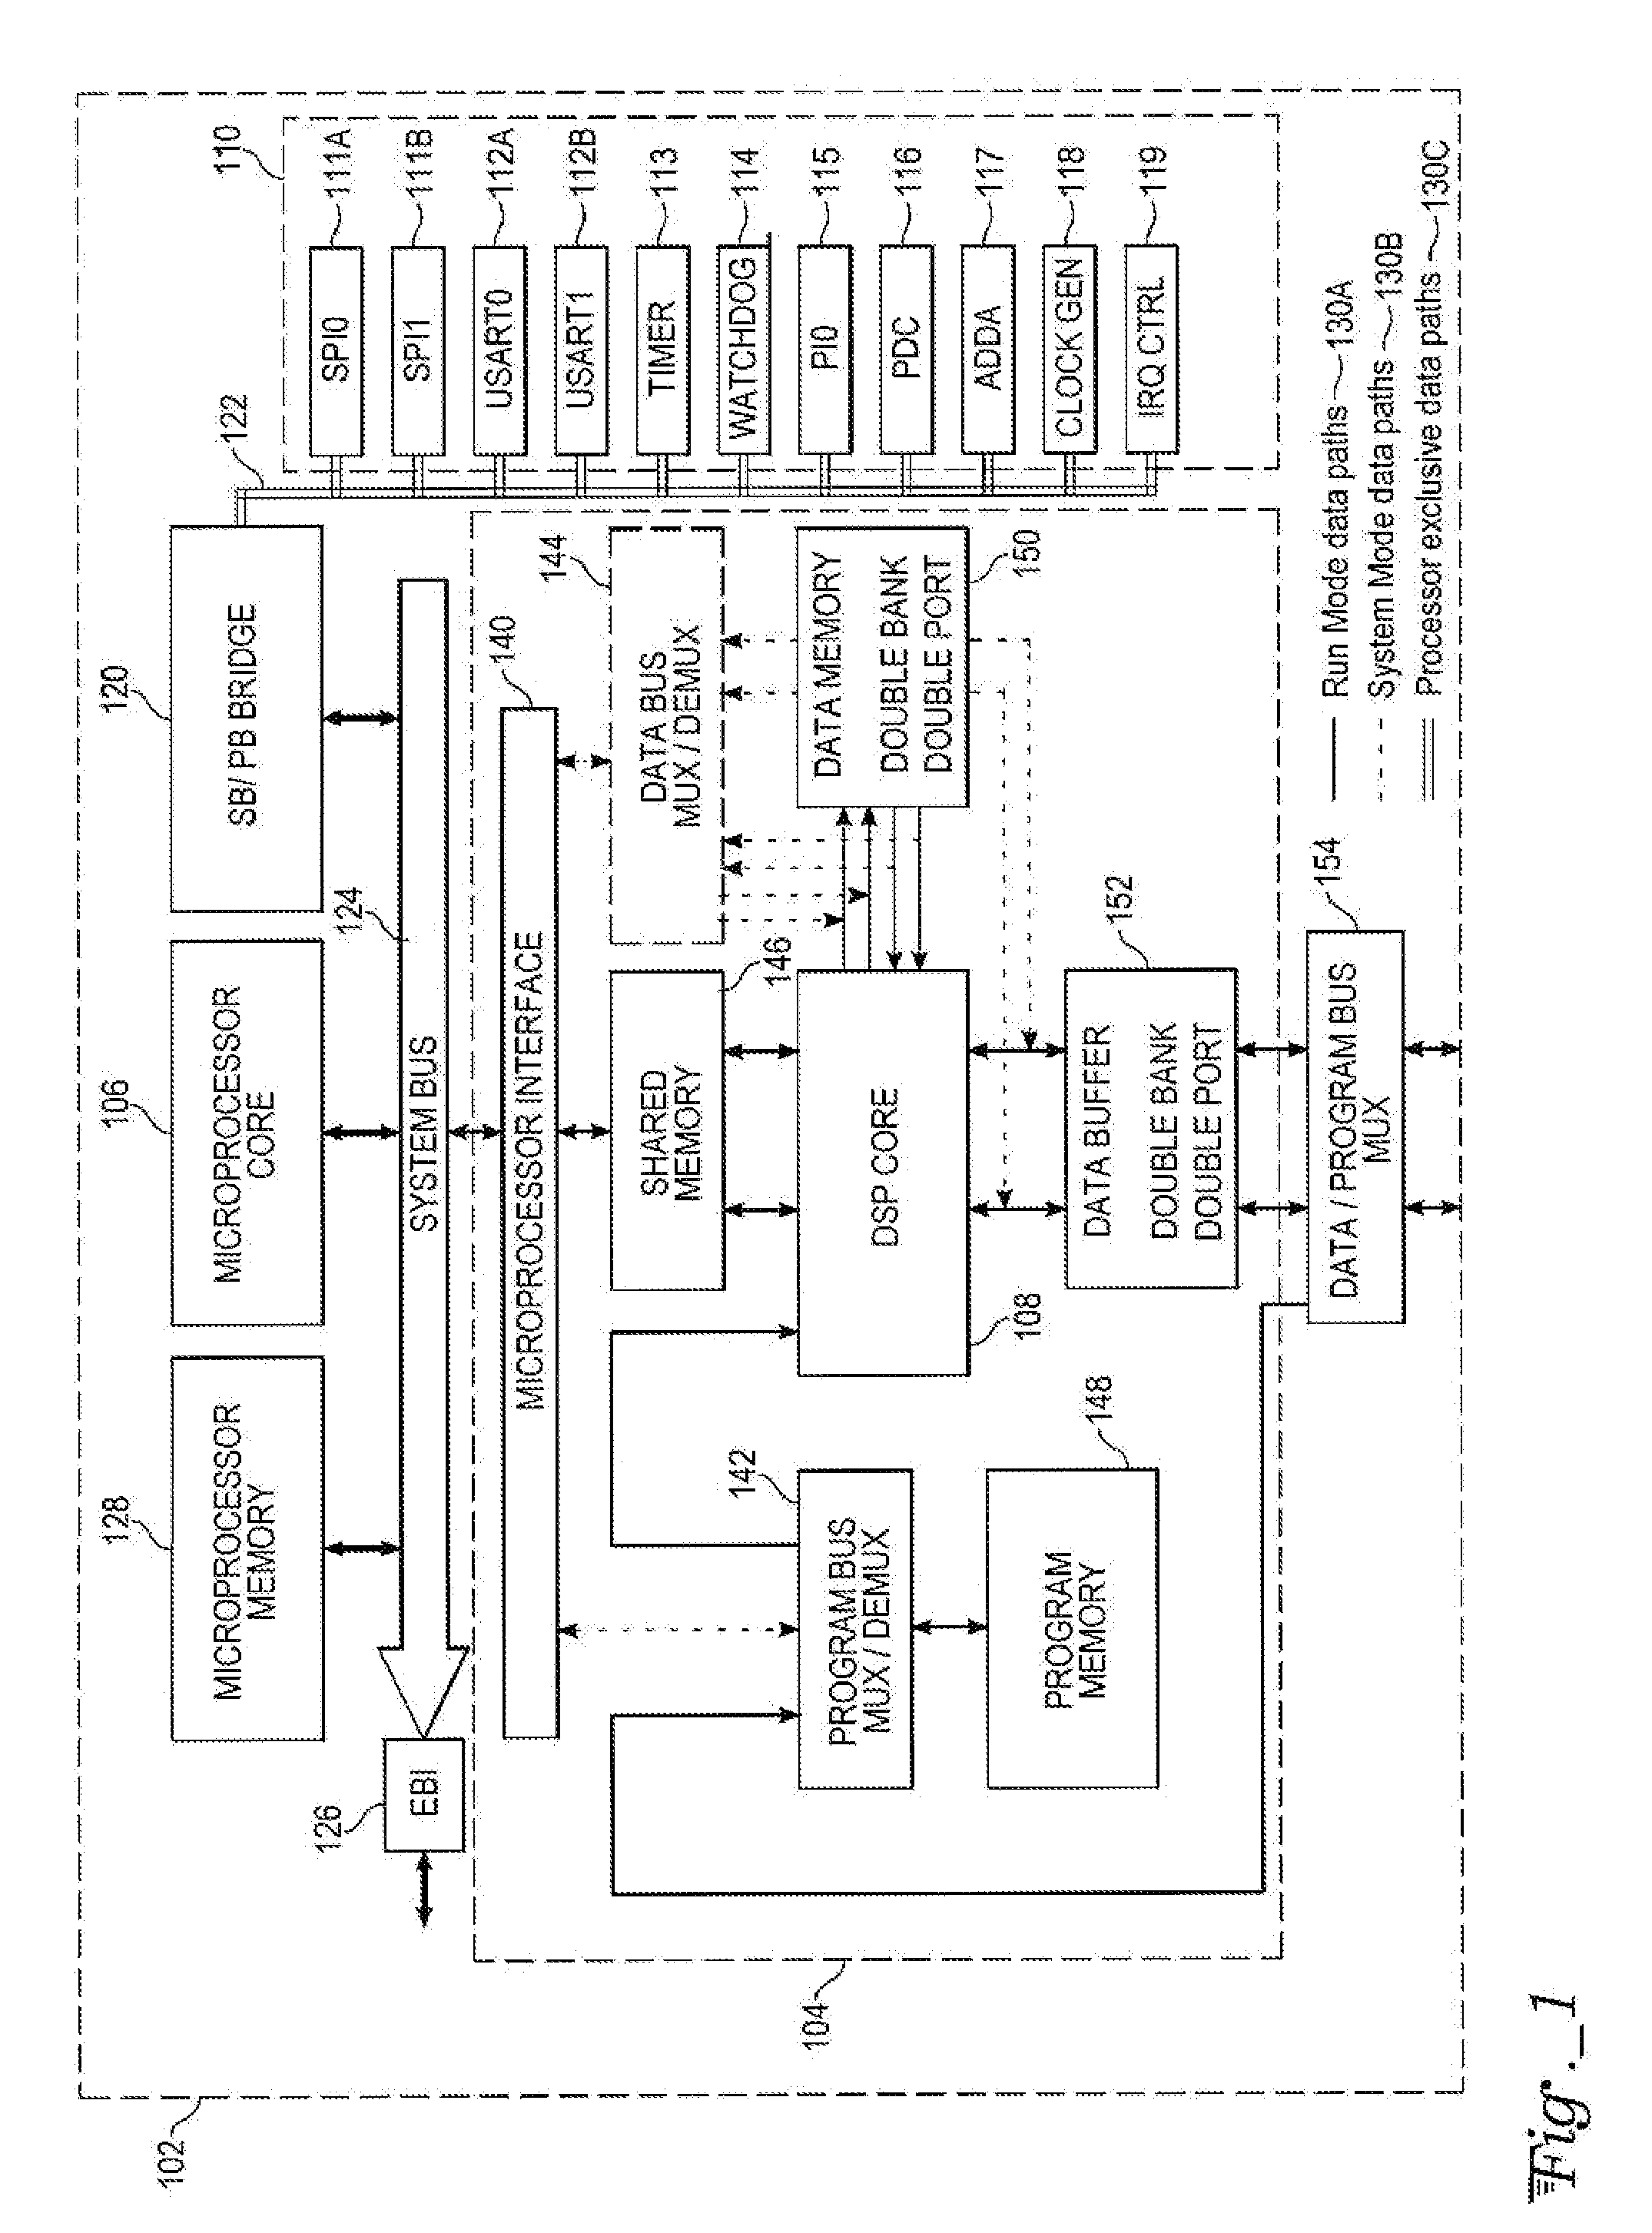 Dual-processor complex domain floating-point DSP system on chip